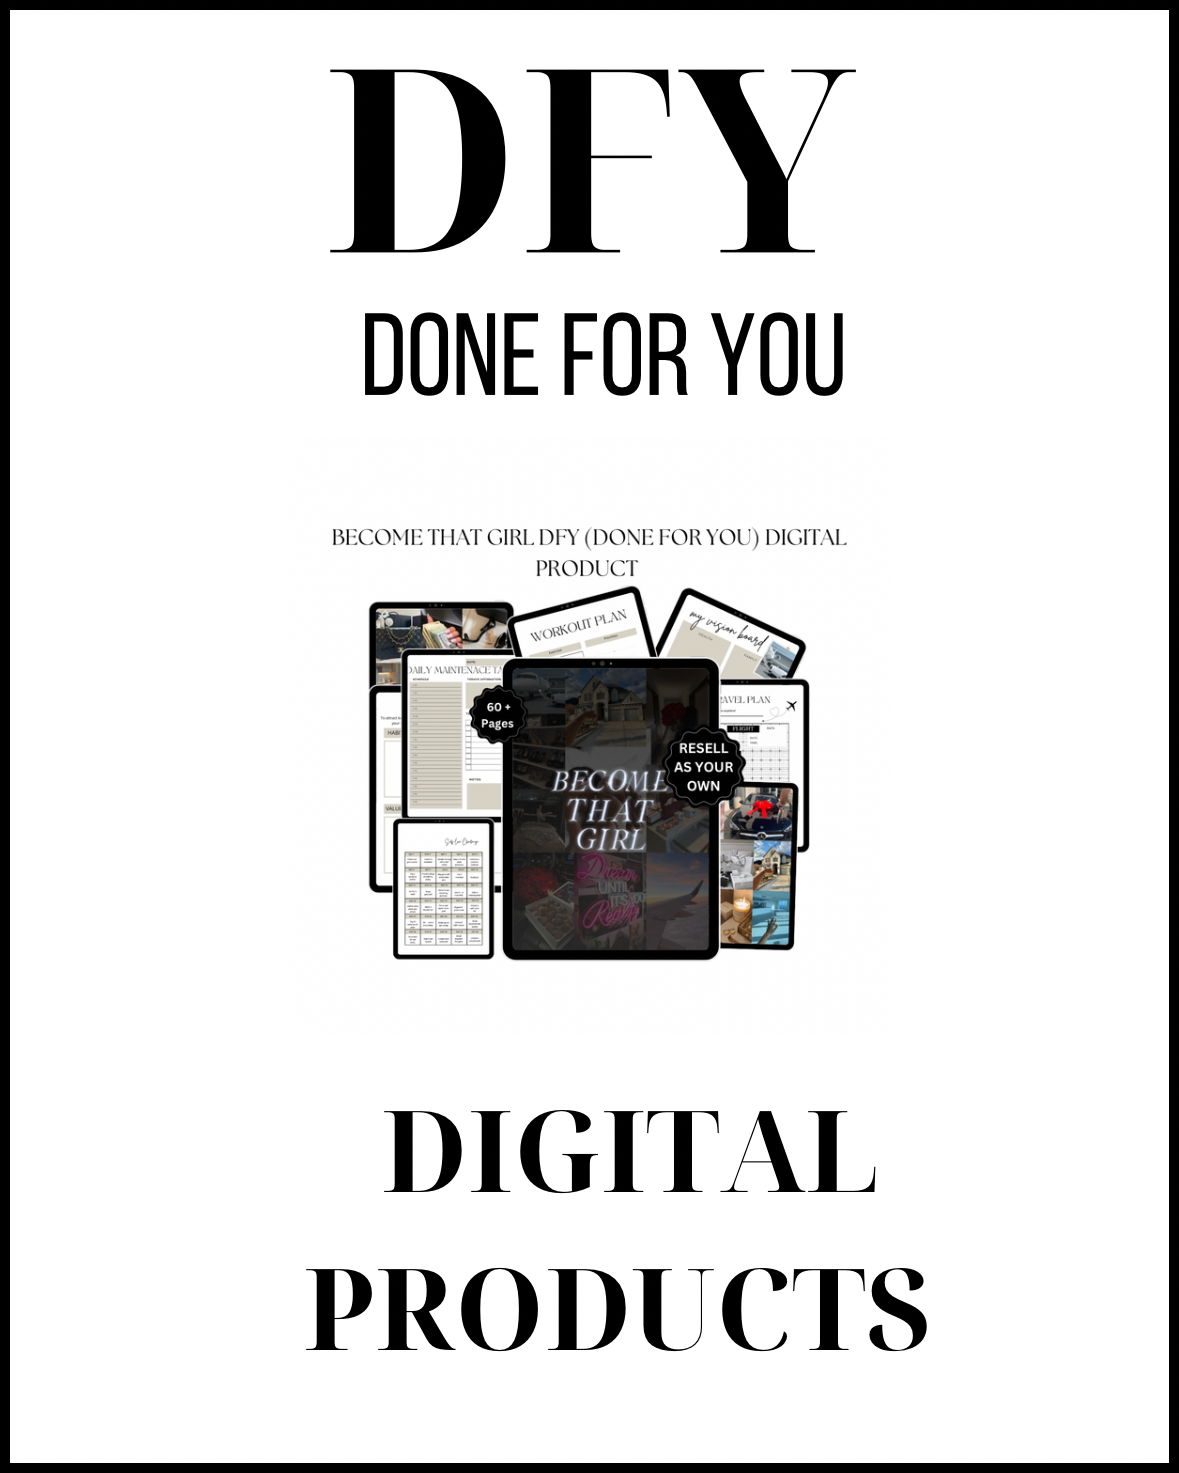 Done for you digital products